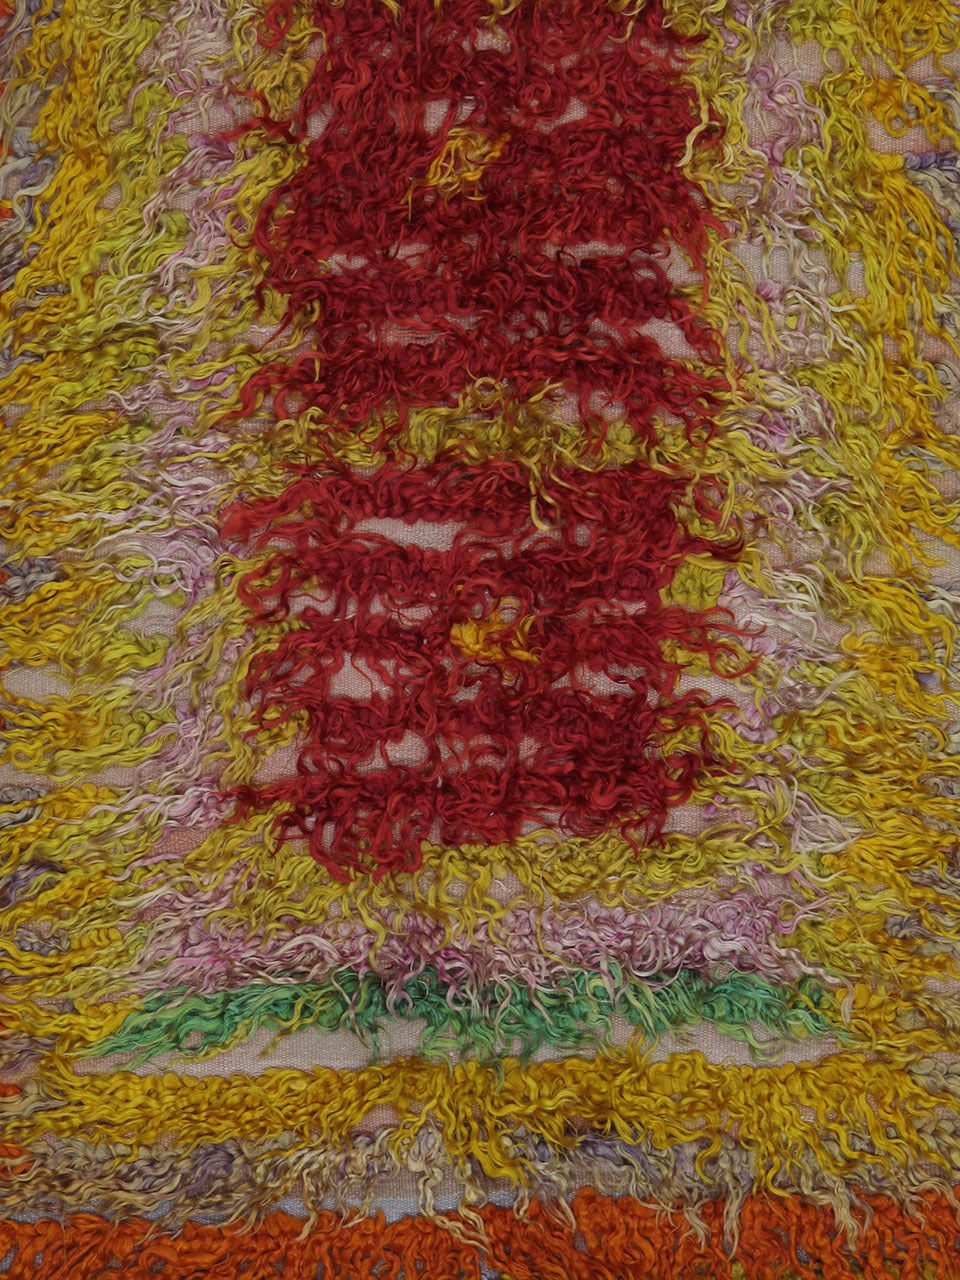 Angora Tulu rug. An old tribal rug from Central Turkey, with loosely knotted, shaggy pile in angora goat hair, a silky, shiny fiber better known as mohair. Such rugs were used as floor covers, blankets or wall hangings to provide warmth and comfort.